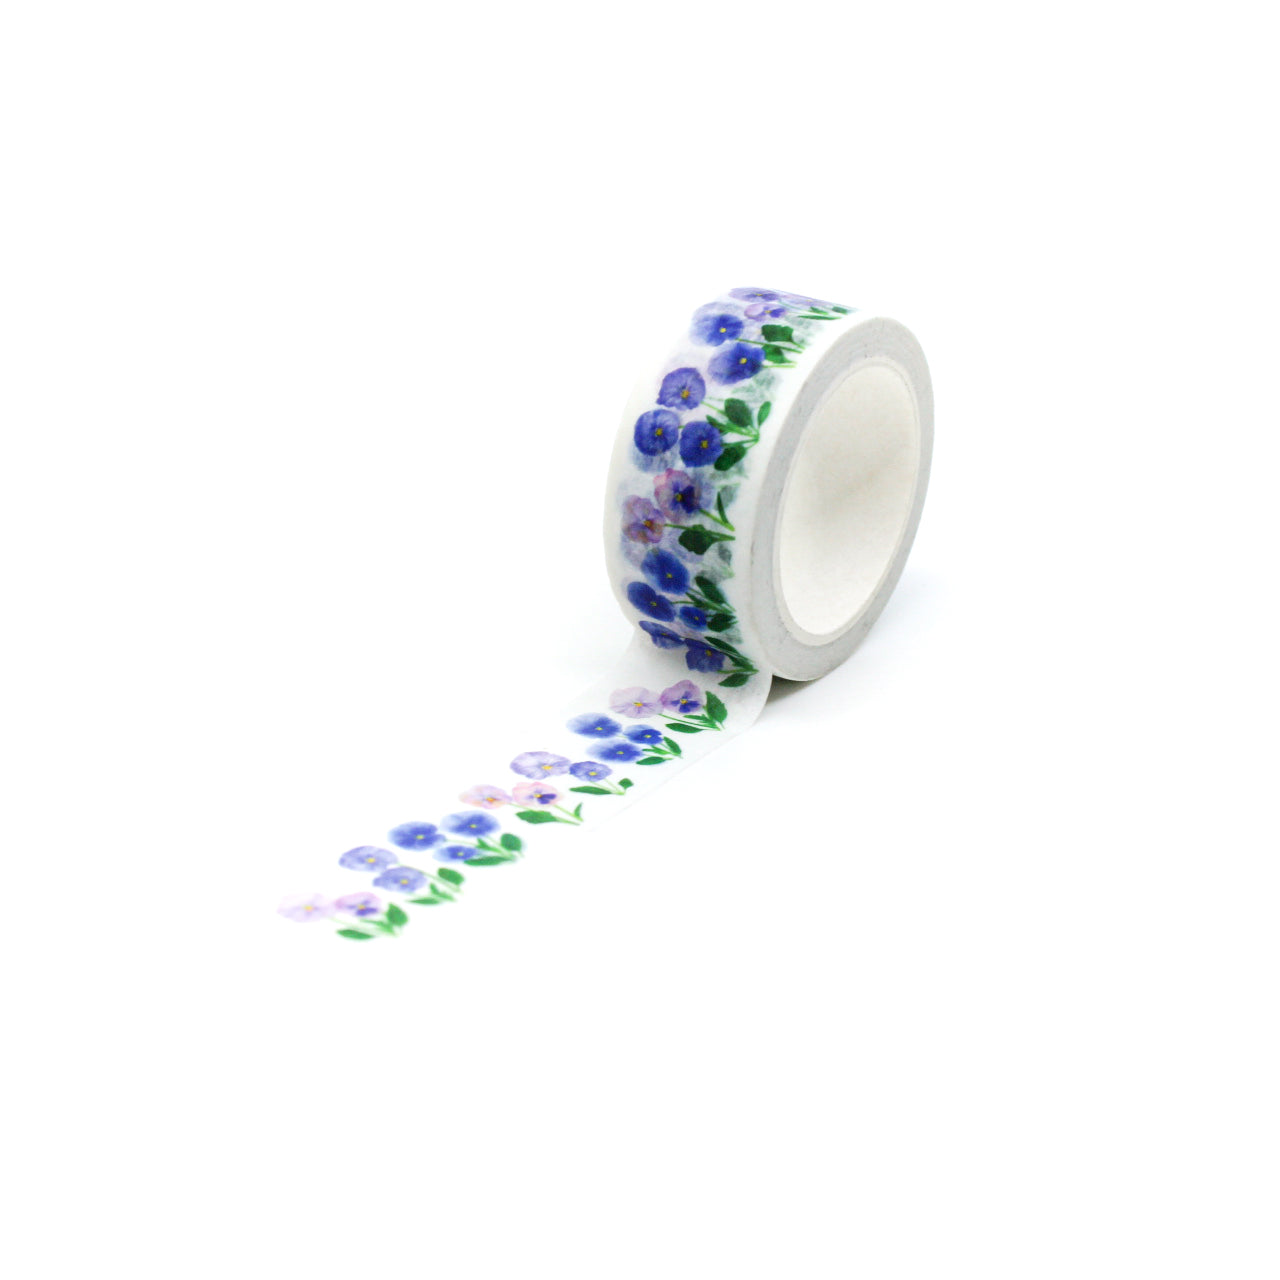 Adorn your projects with the charm of purple pansies using our exquisite purple pansy washi tape, showcasing delicate and vibrant floral patterns and Elevate your crafts with our captivating purple pansy washi tape. This tape is designed by Bottle Branch and sold at BBB Supplies Craft Shop.